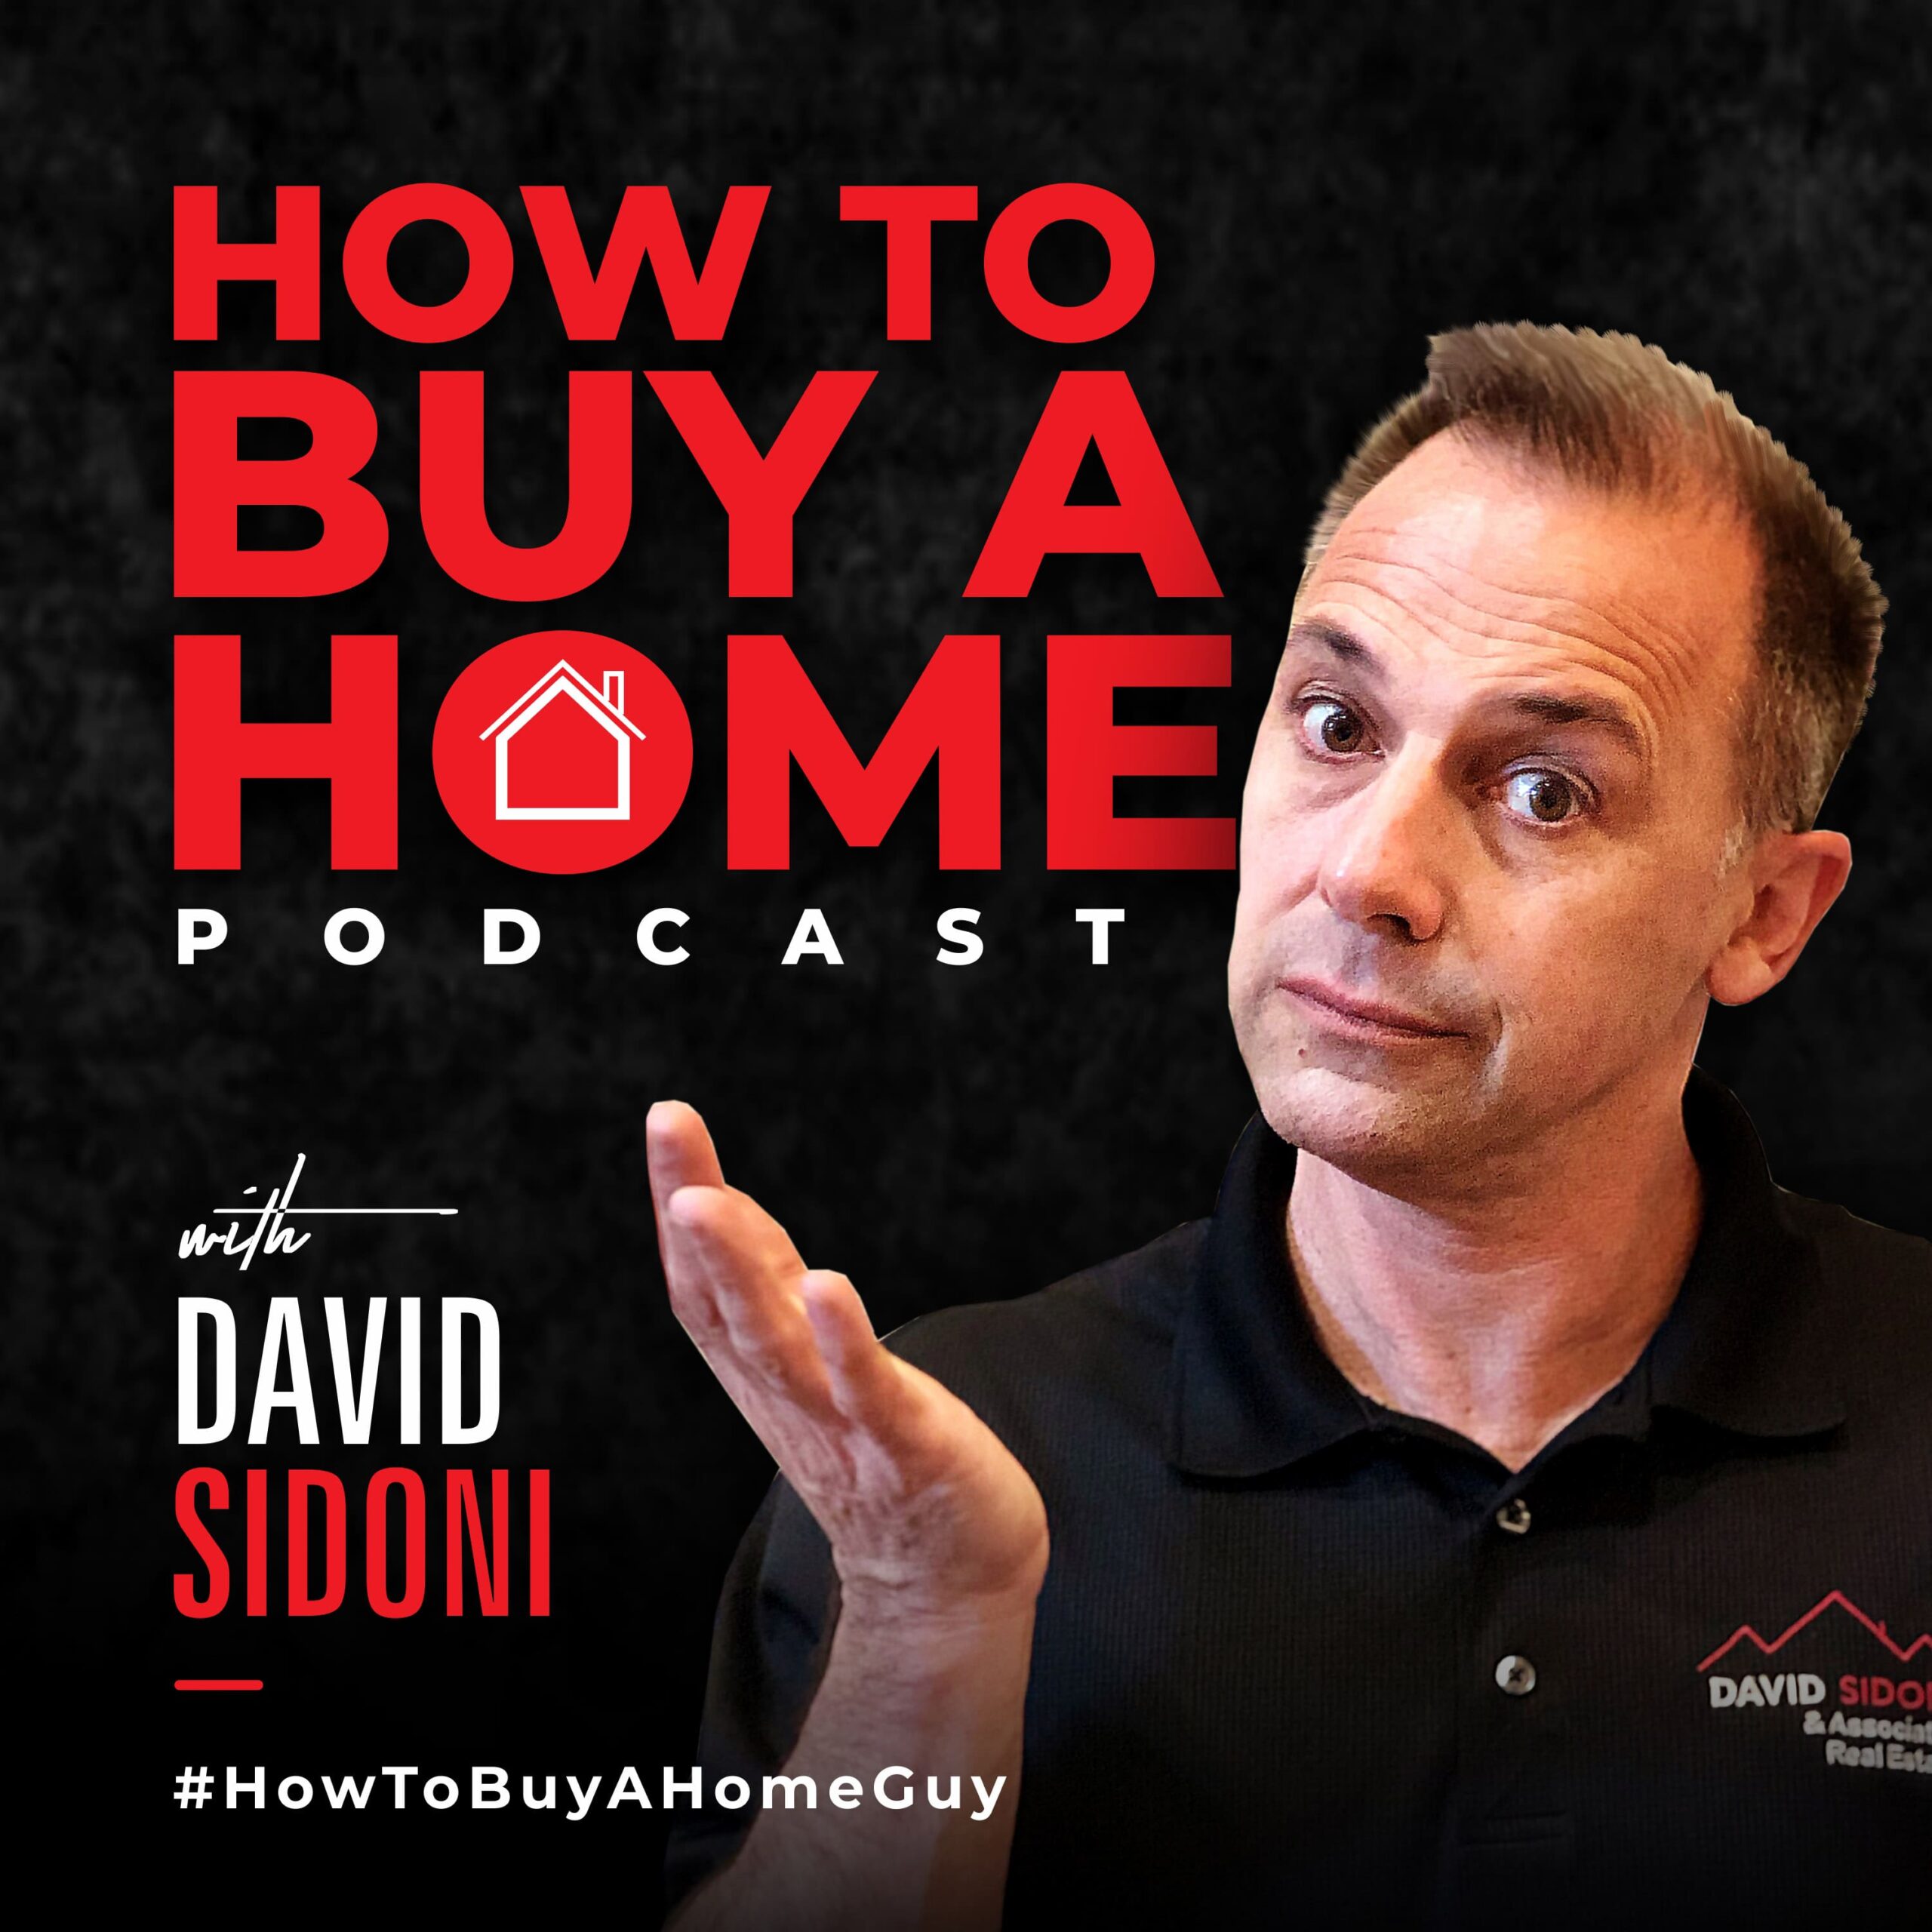 how to buy a home podcast thumbnail